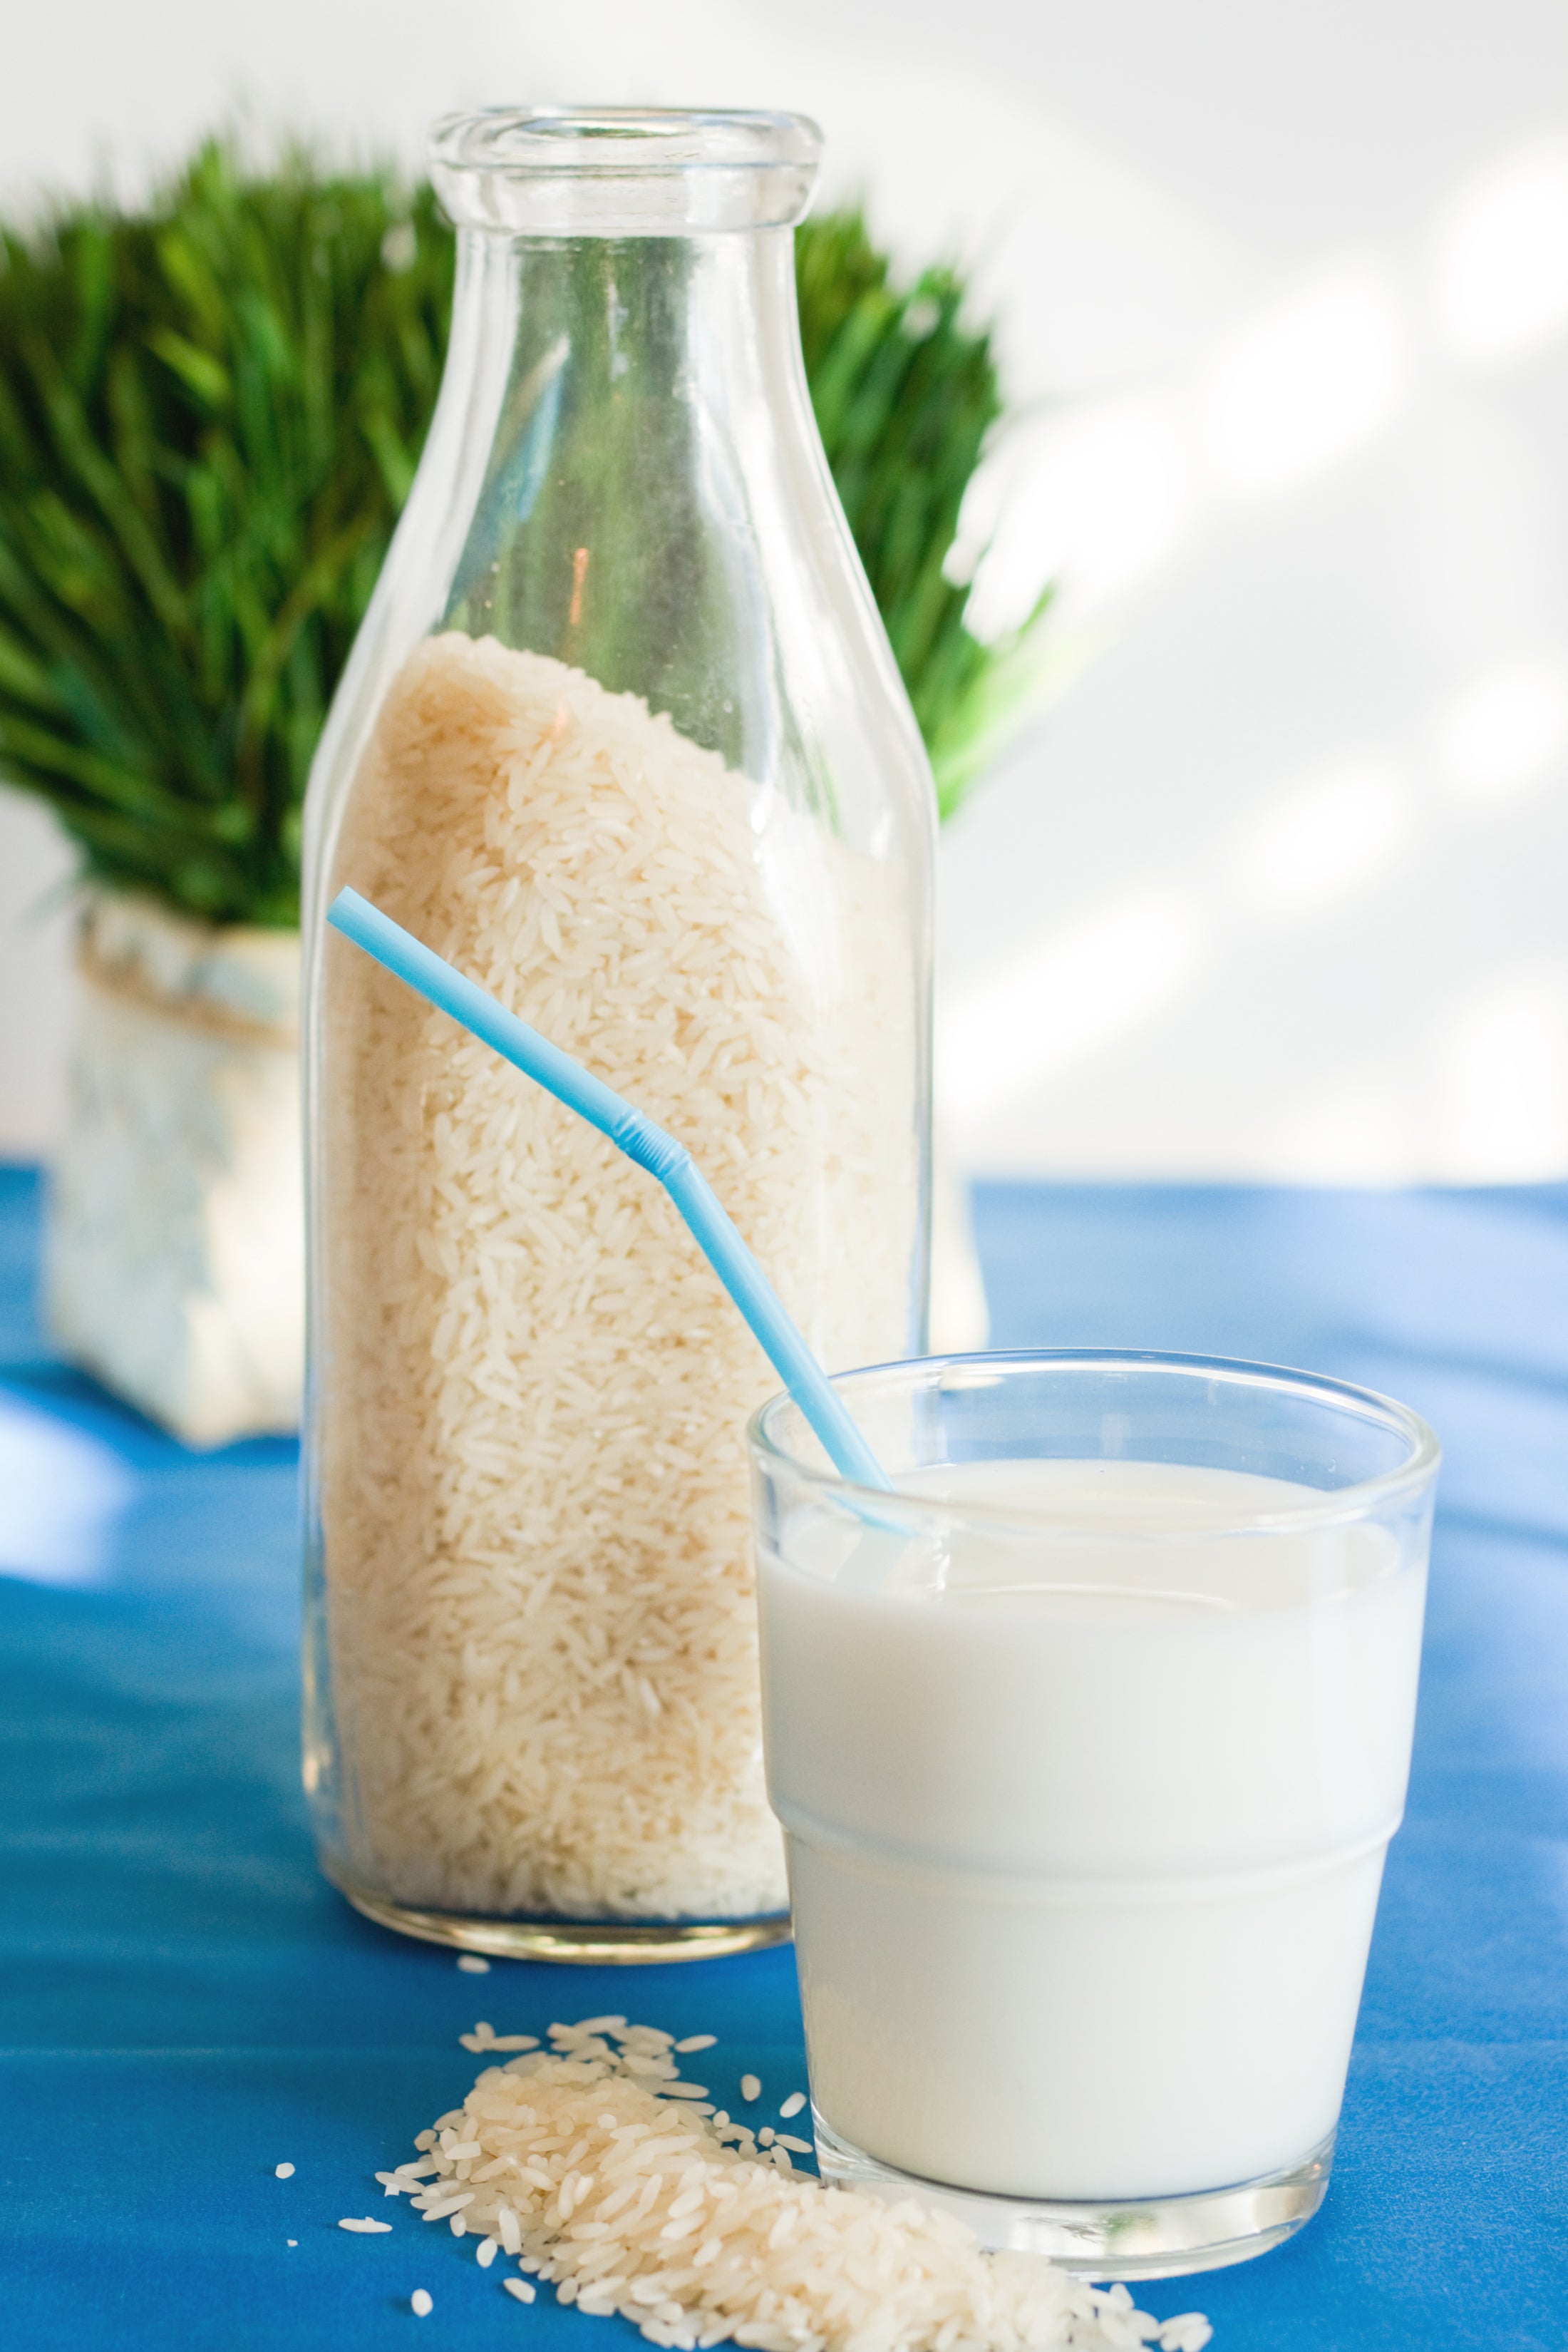 Rice milk is a good alternative for those with nut or soya allergies